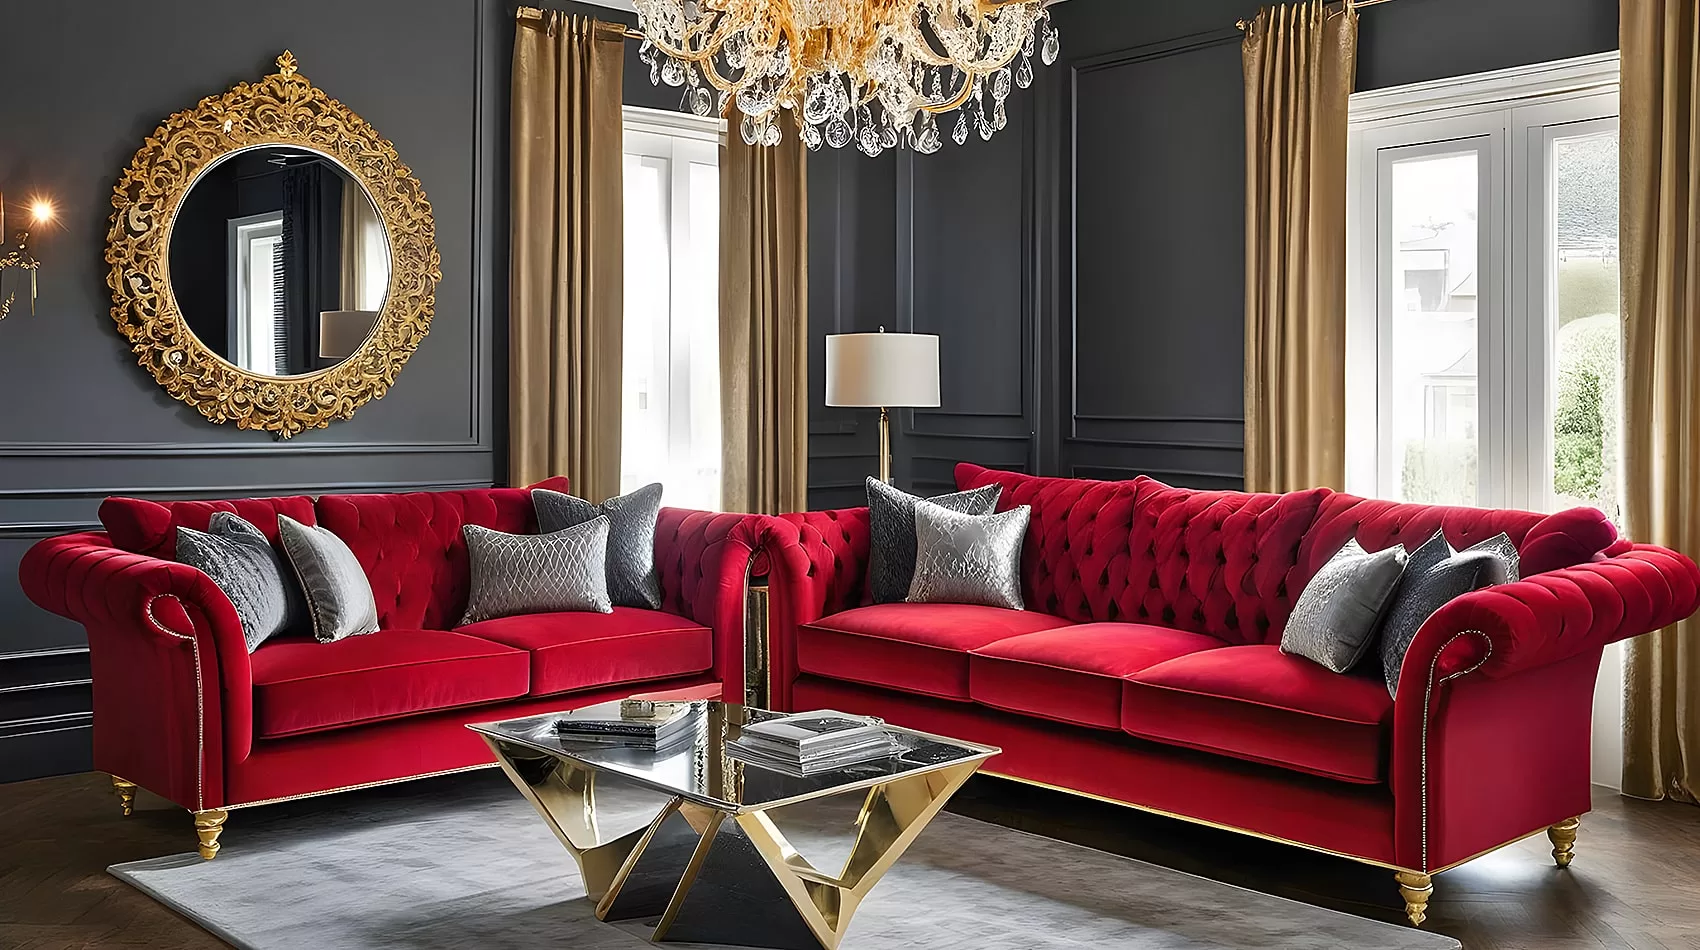 Red Couch | Red Sofa | Red Sofa Set